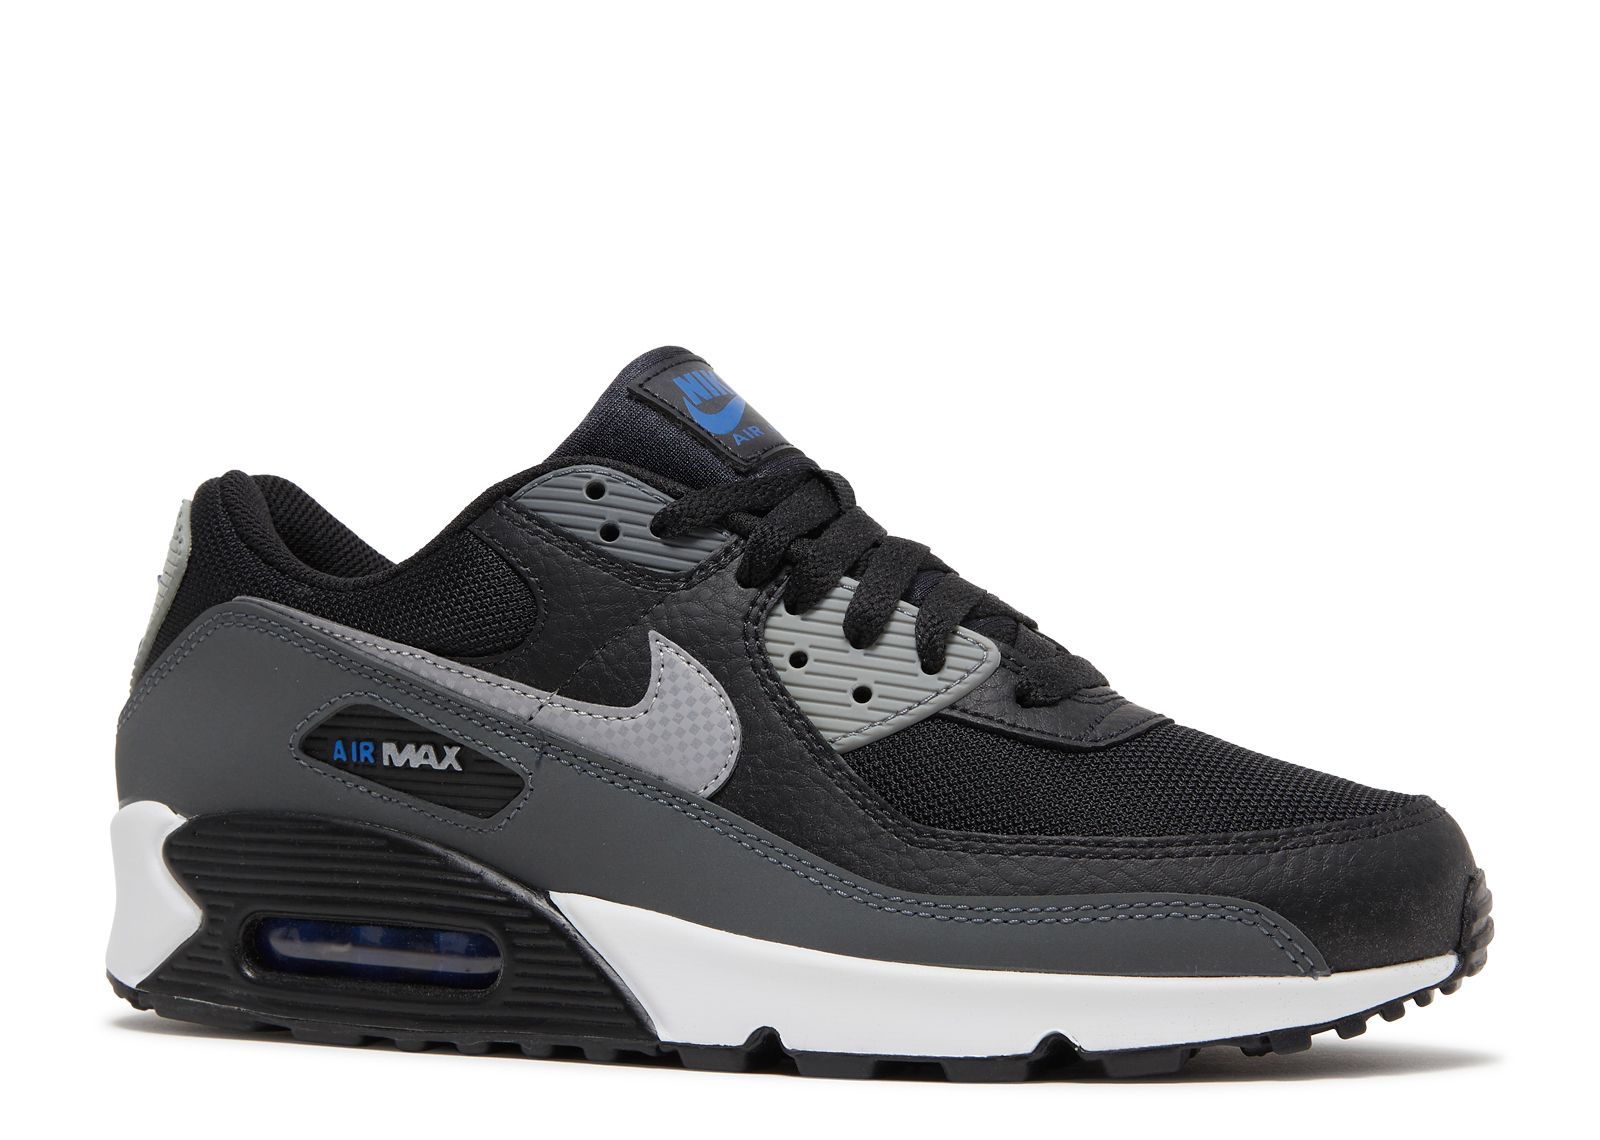 Air Max 90 Black / Iron Grey / Particle Grey / Reflect Silver Low Top  Sneakers